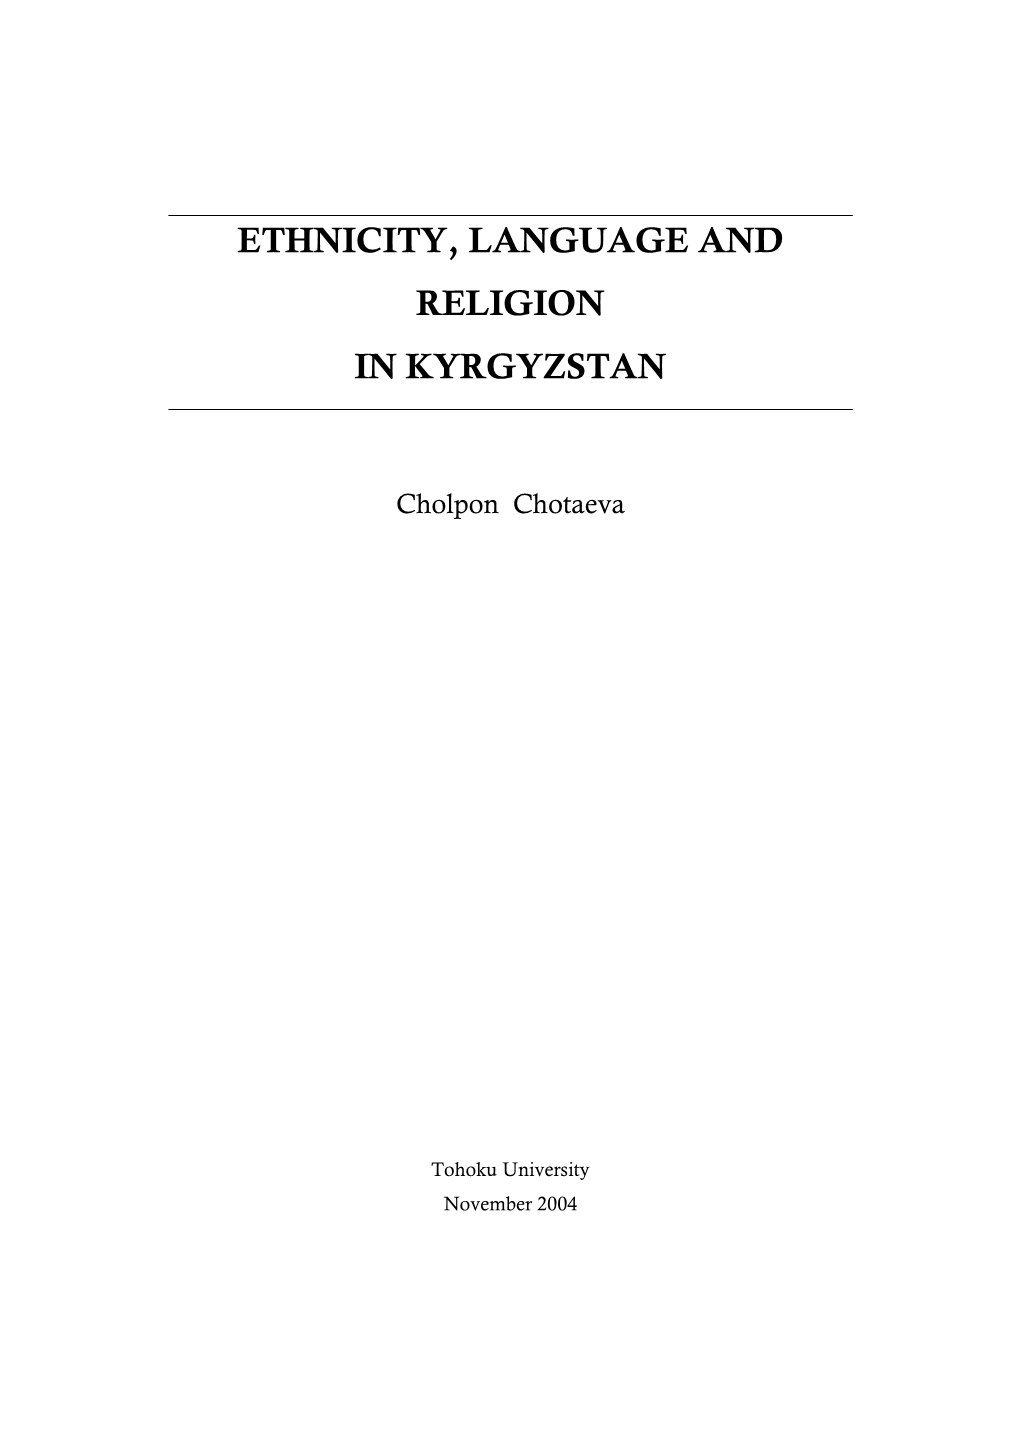 Ethnicity, Language and Religion in Kyrgyzstan